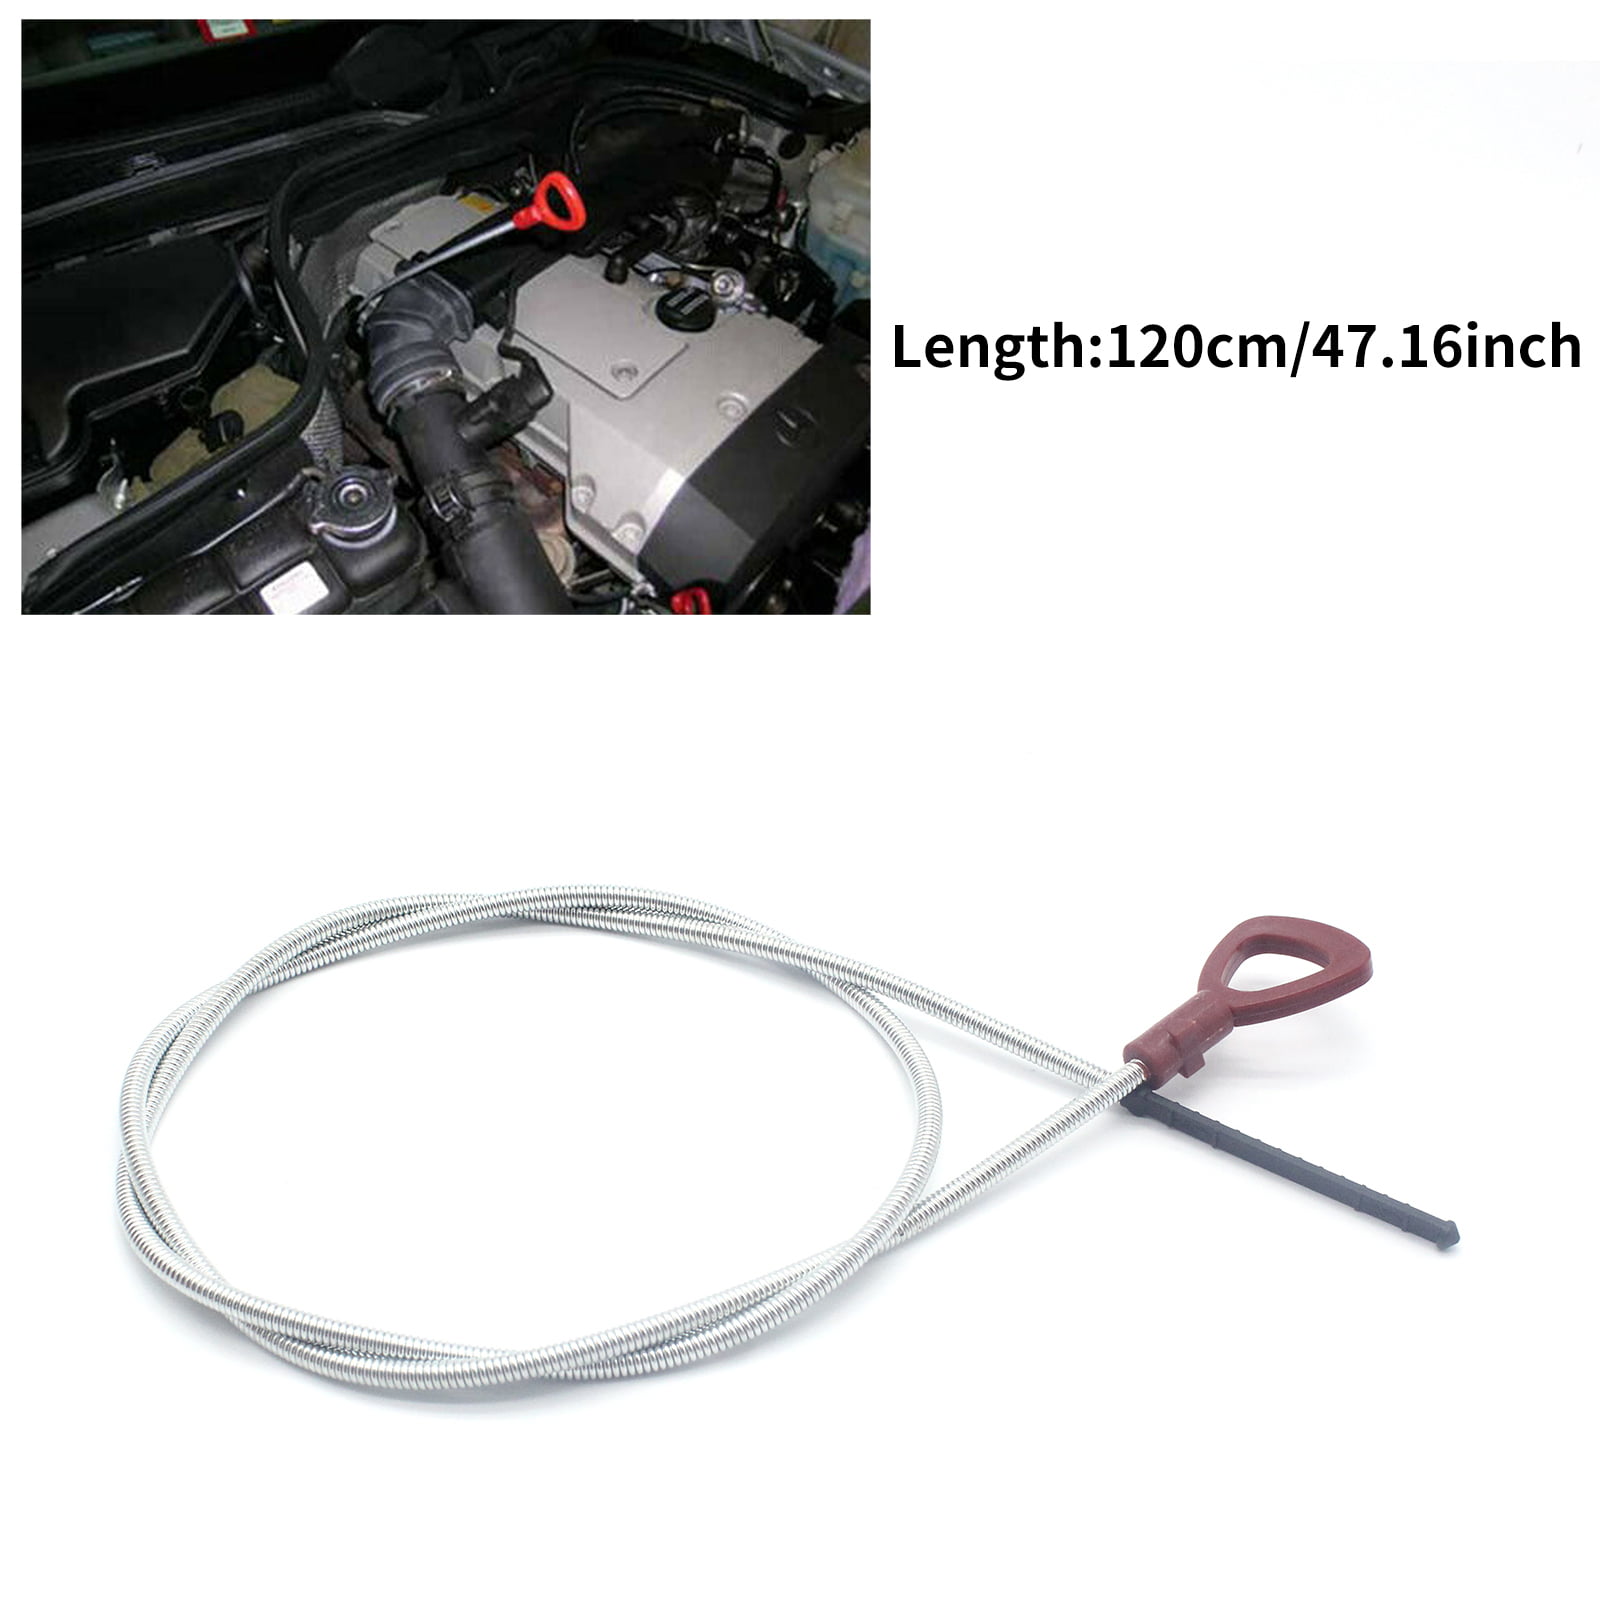 Transmission Fluid Tool Gearbox Dipstick Fluid Oil Level Replacement For Mercedes-Benz C230 E430 S420 ML320 OE:140589152 